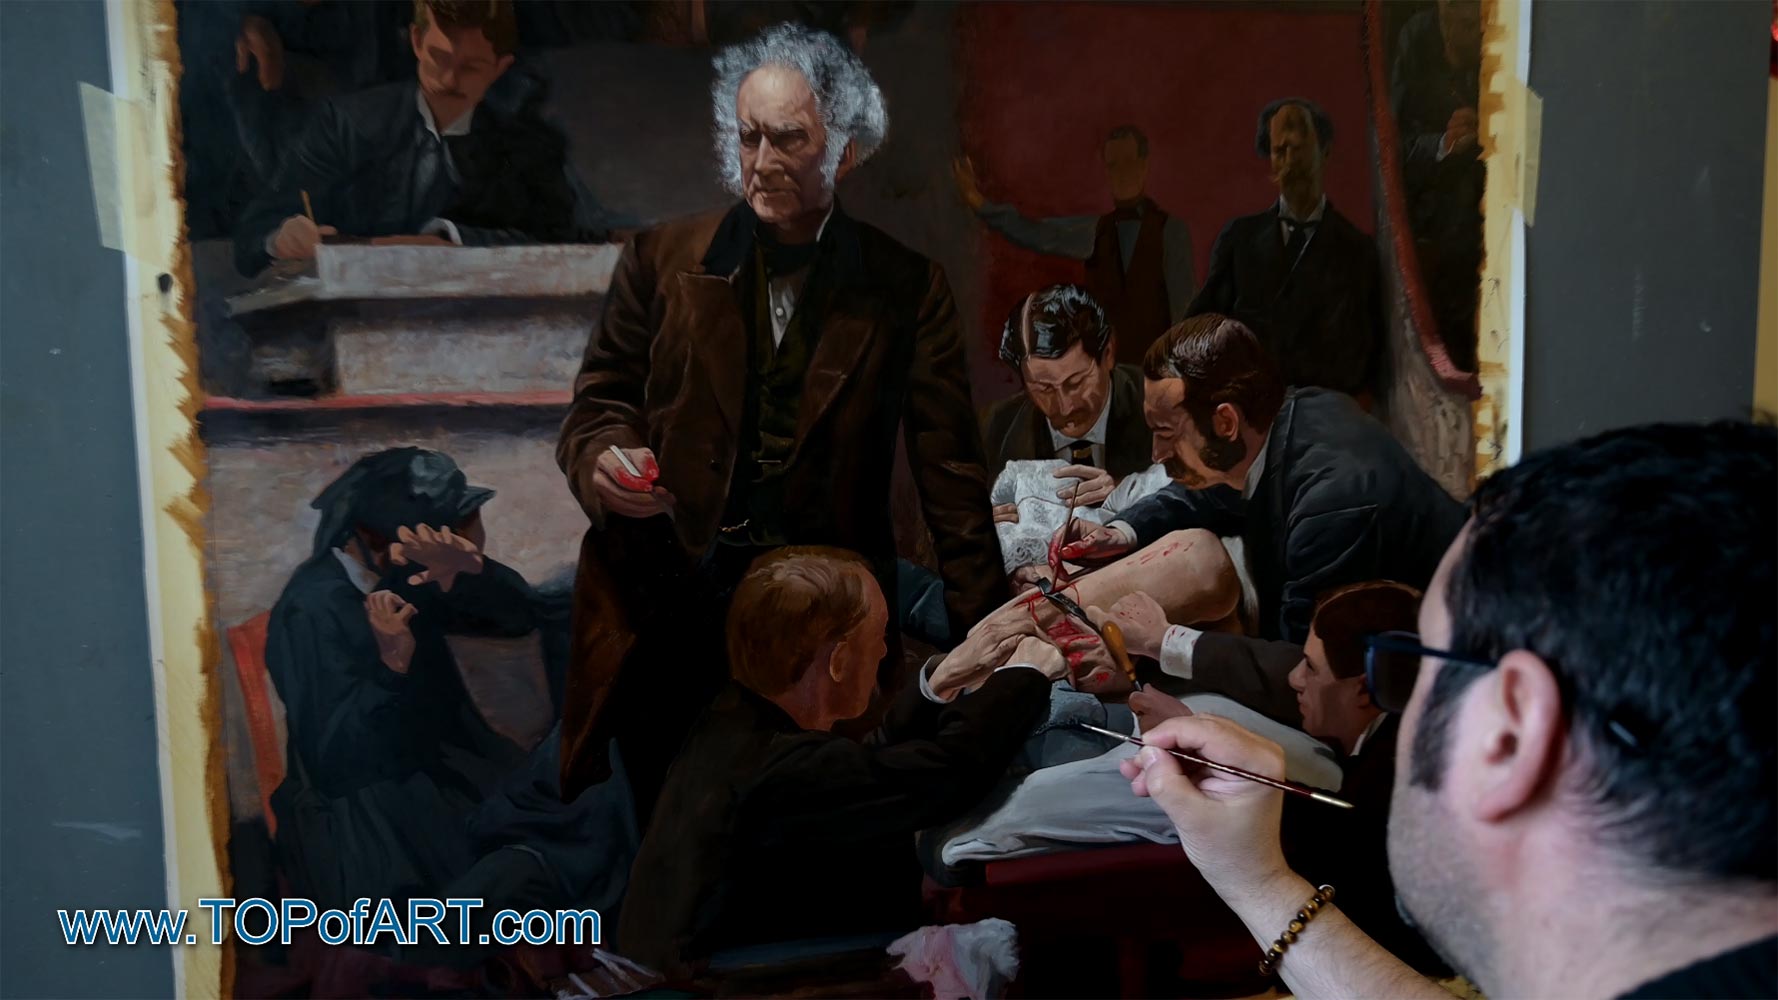 The Gross Clinic by Eakins - Painting Reproduction Video